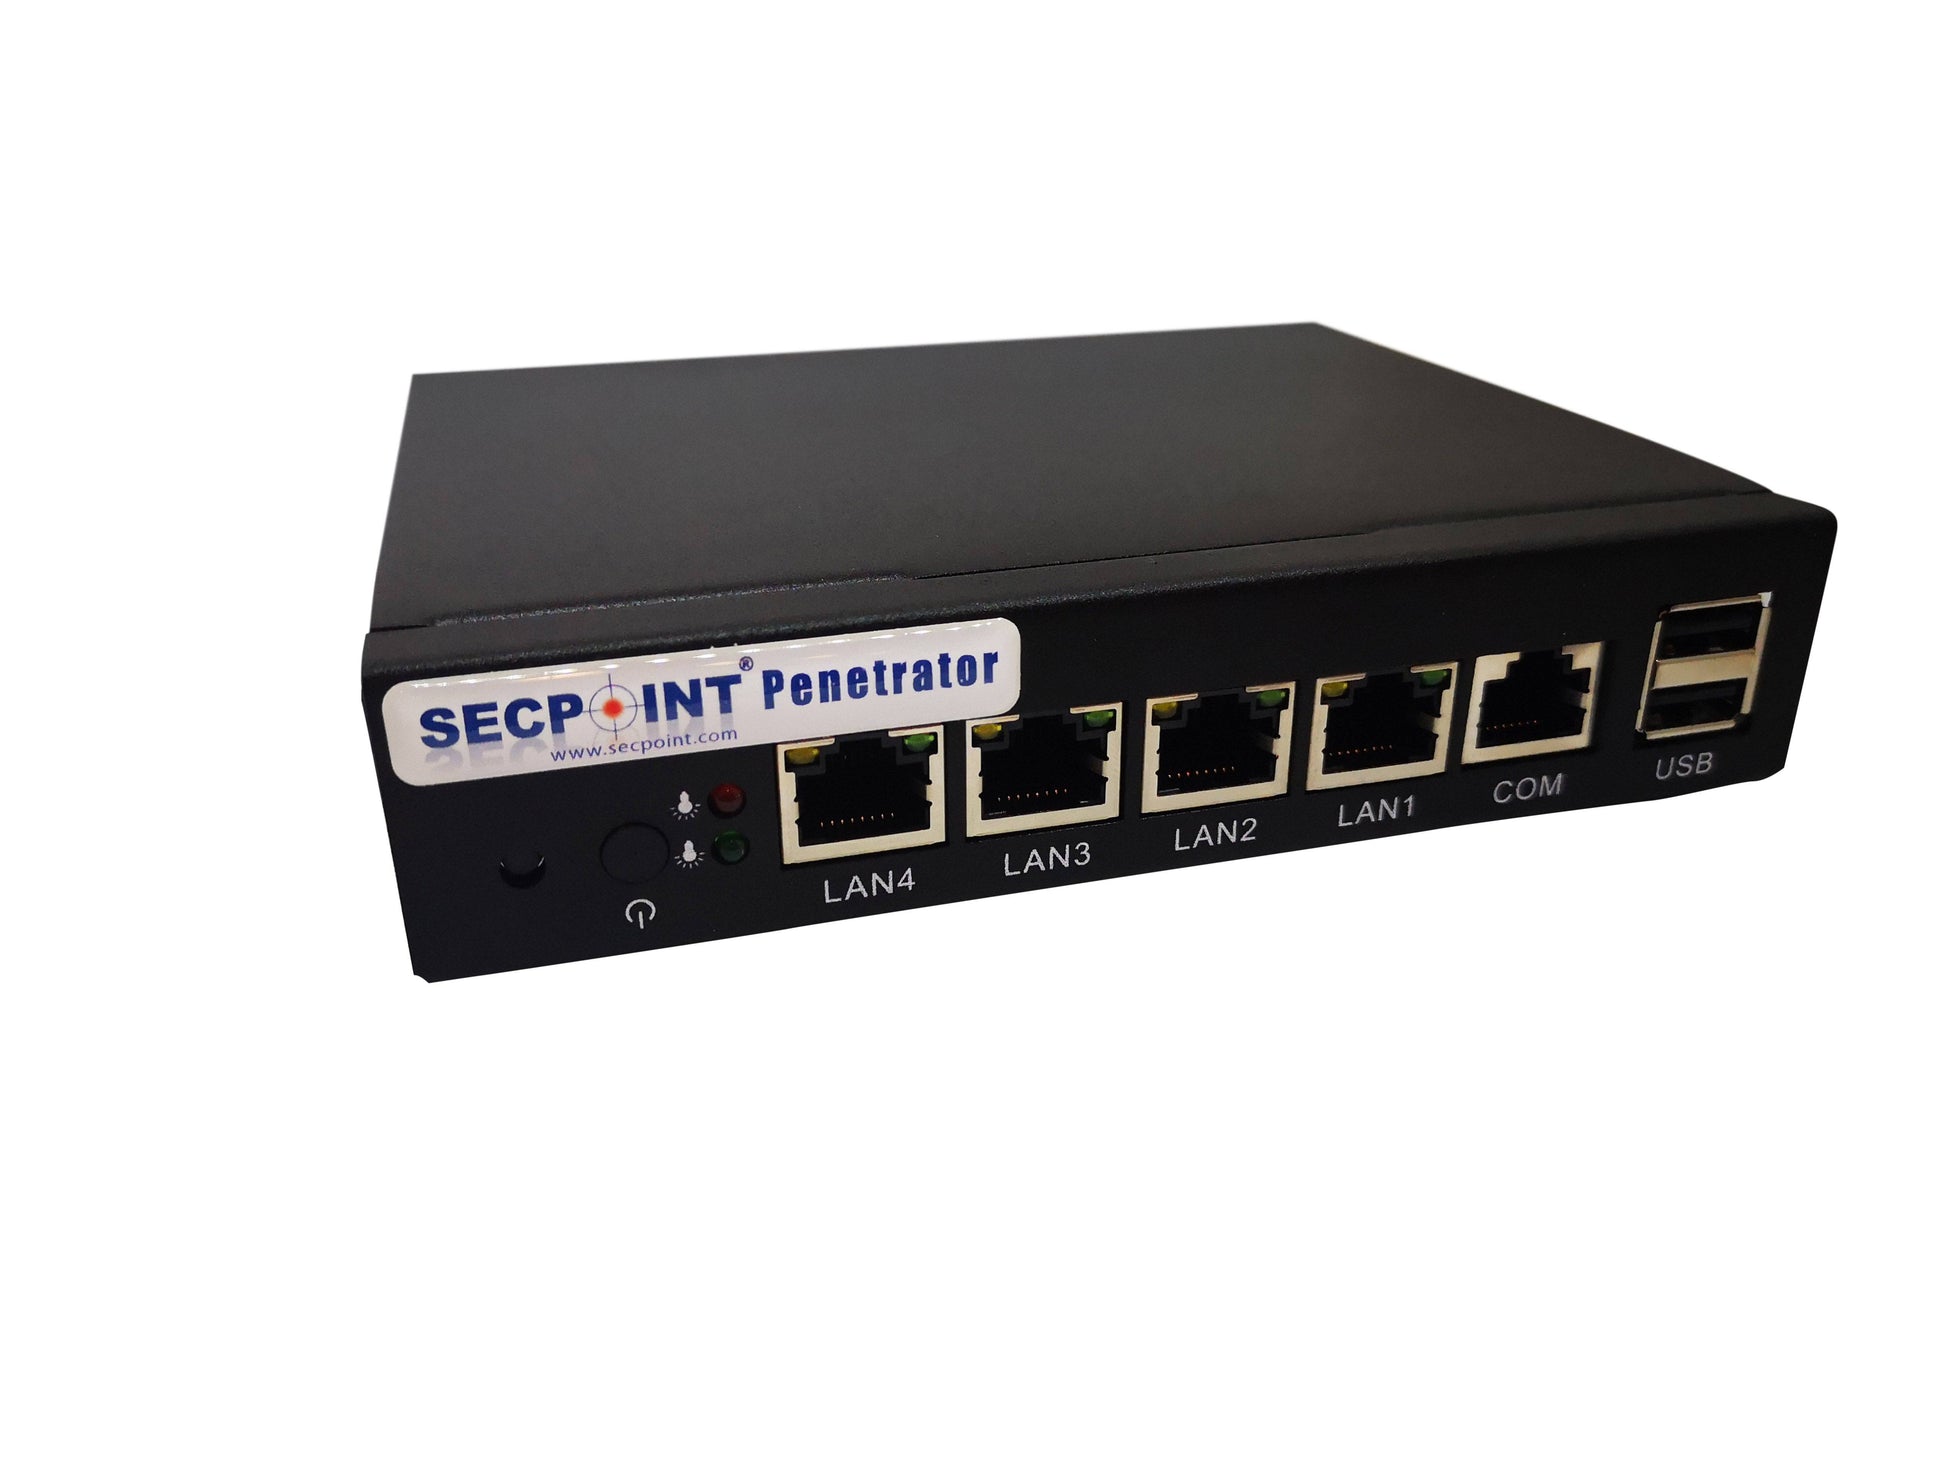 SecPoint Protector P9 - 5 User UTM Firewall (1 Year License) Small Form Factor (SFF) - SecPoint